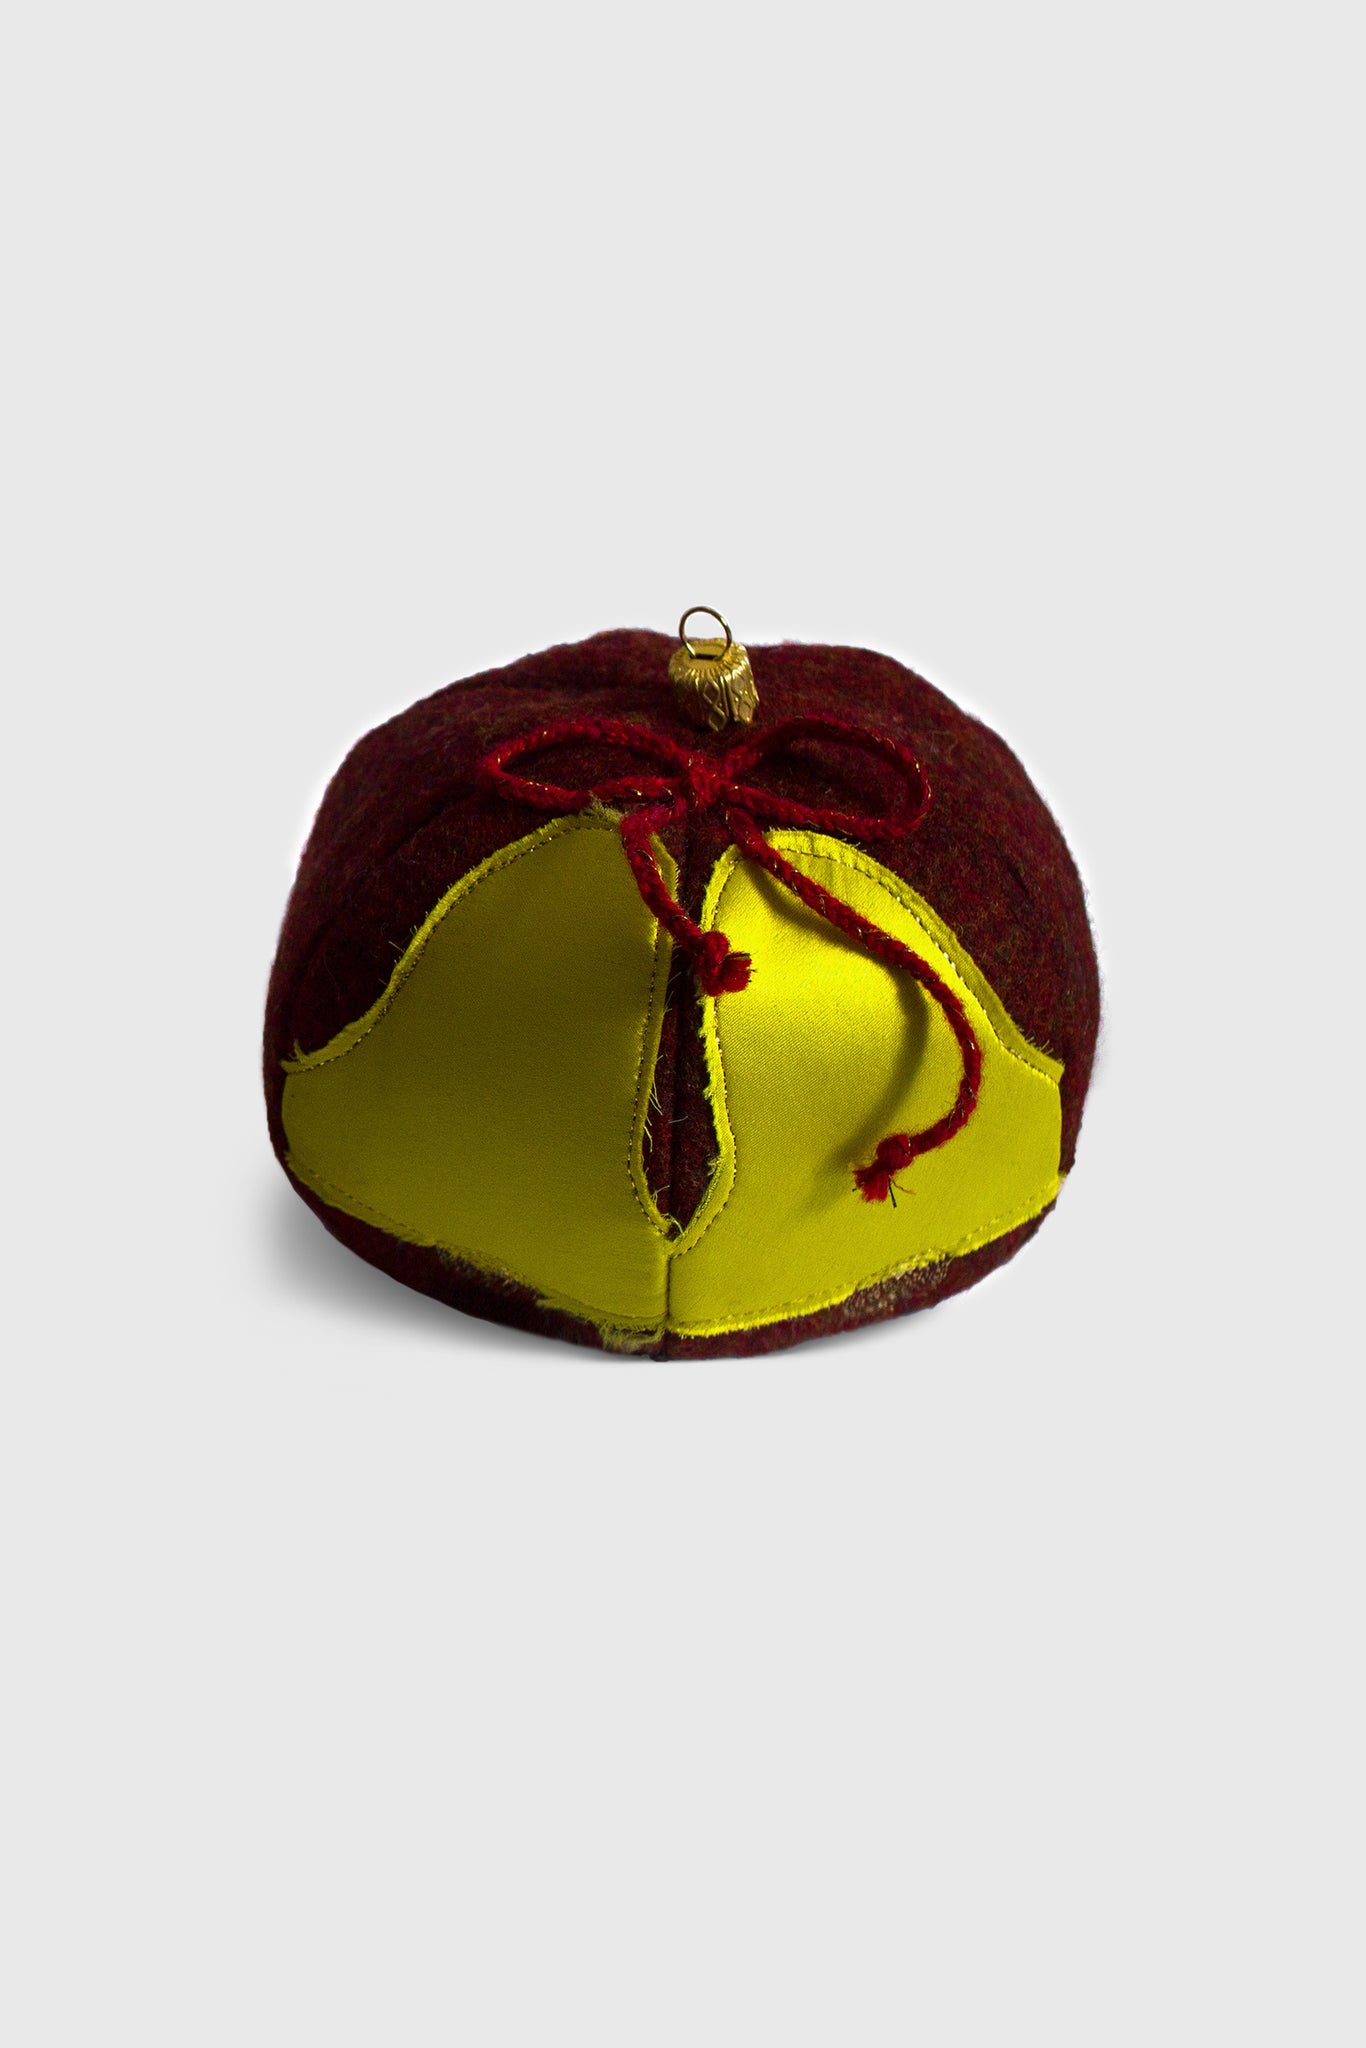 Ruxandra, Christmas globe decoration, textile decoration, made by hand, crafted in wool and silk, Xmas giant globe, all natural, sustainable, pet friendly, deep burgundy red and lemon yellow, Ruxandra